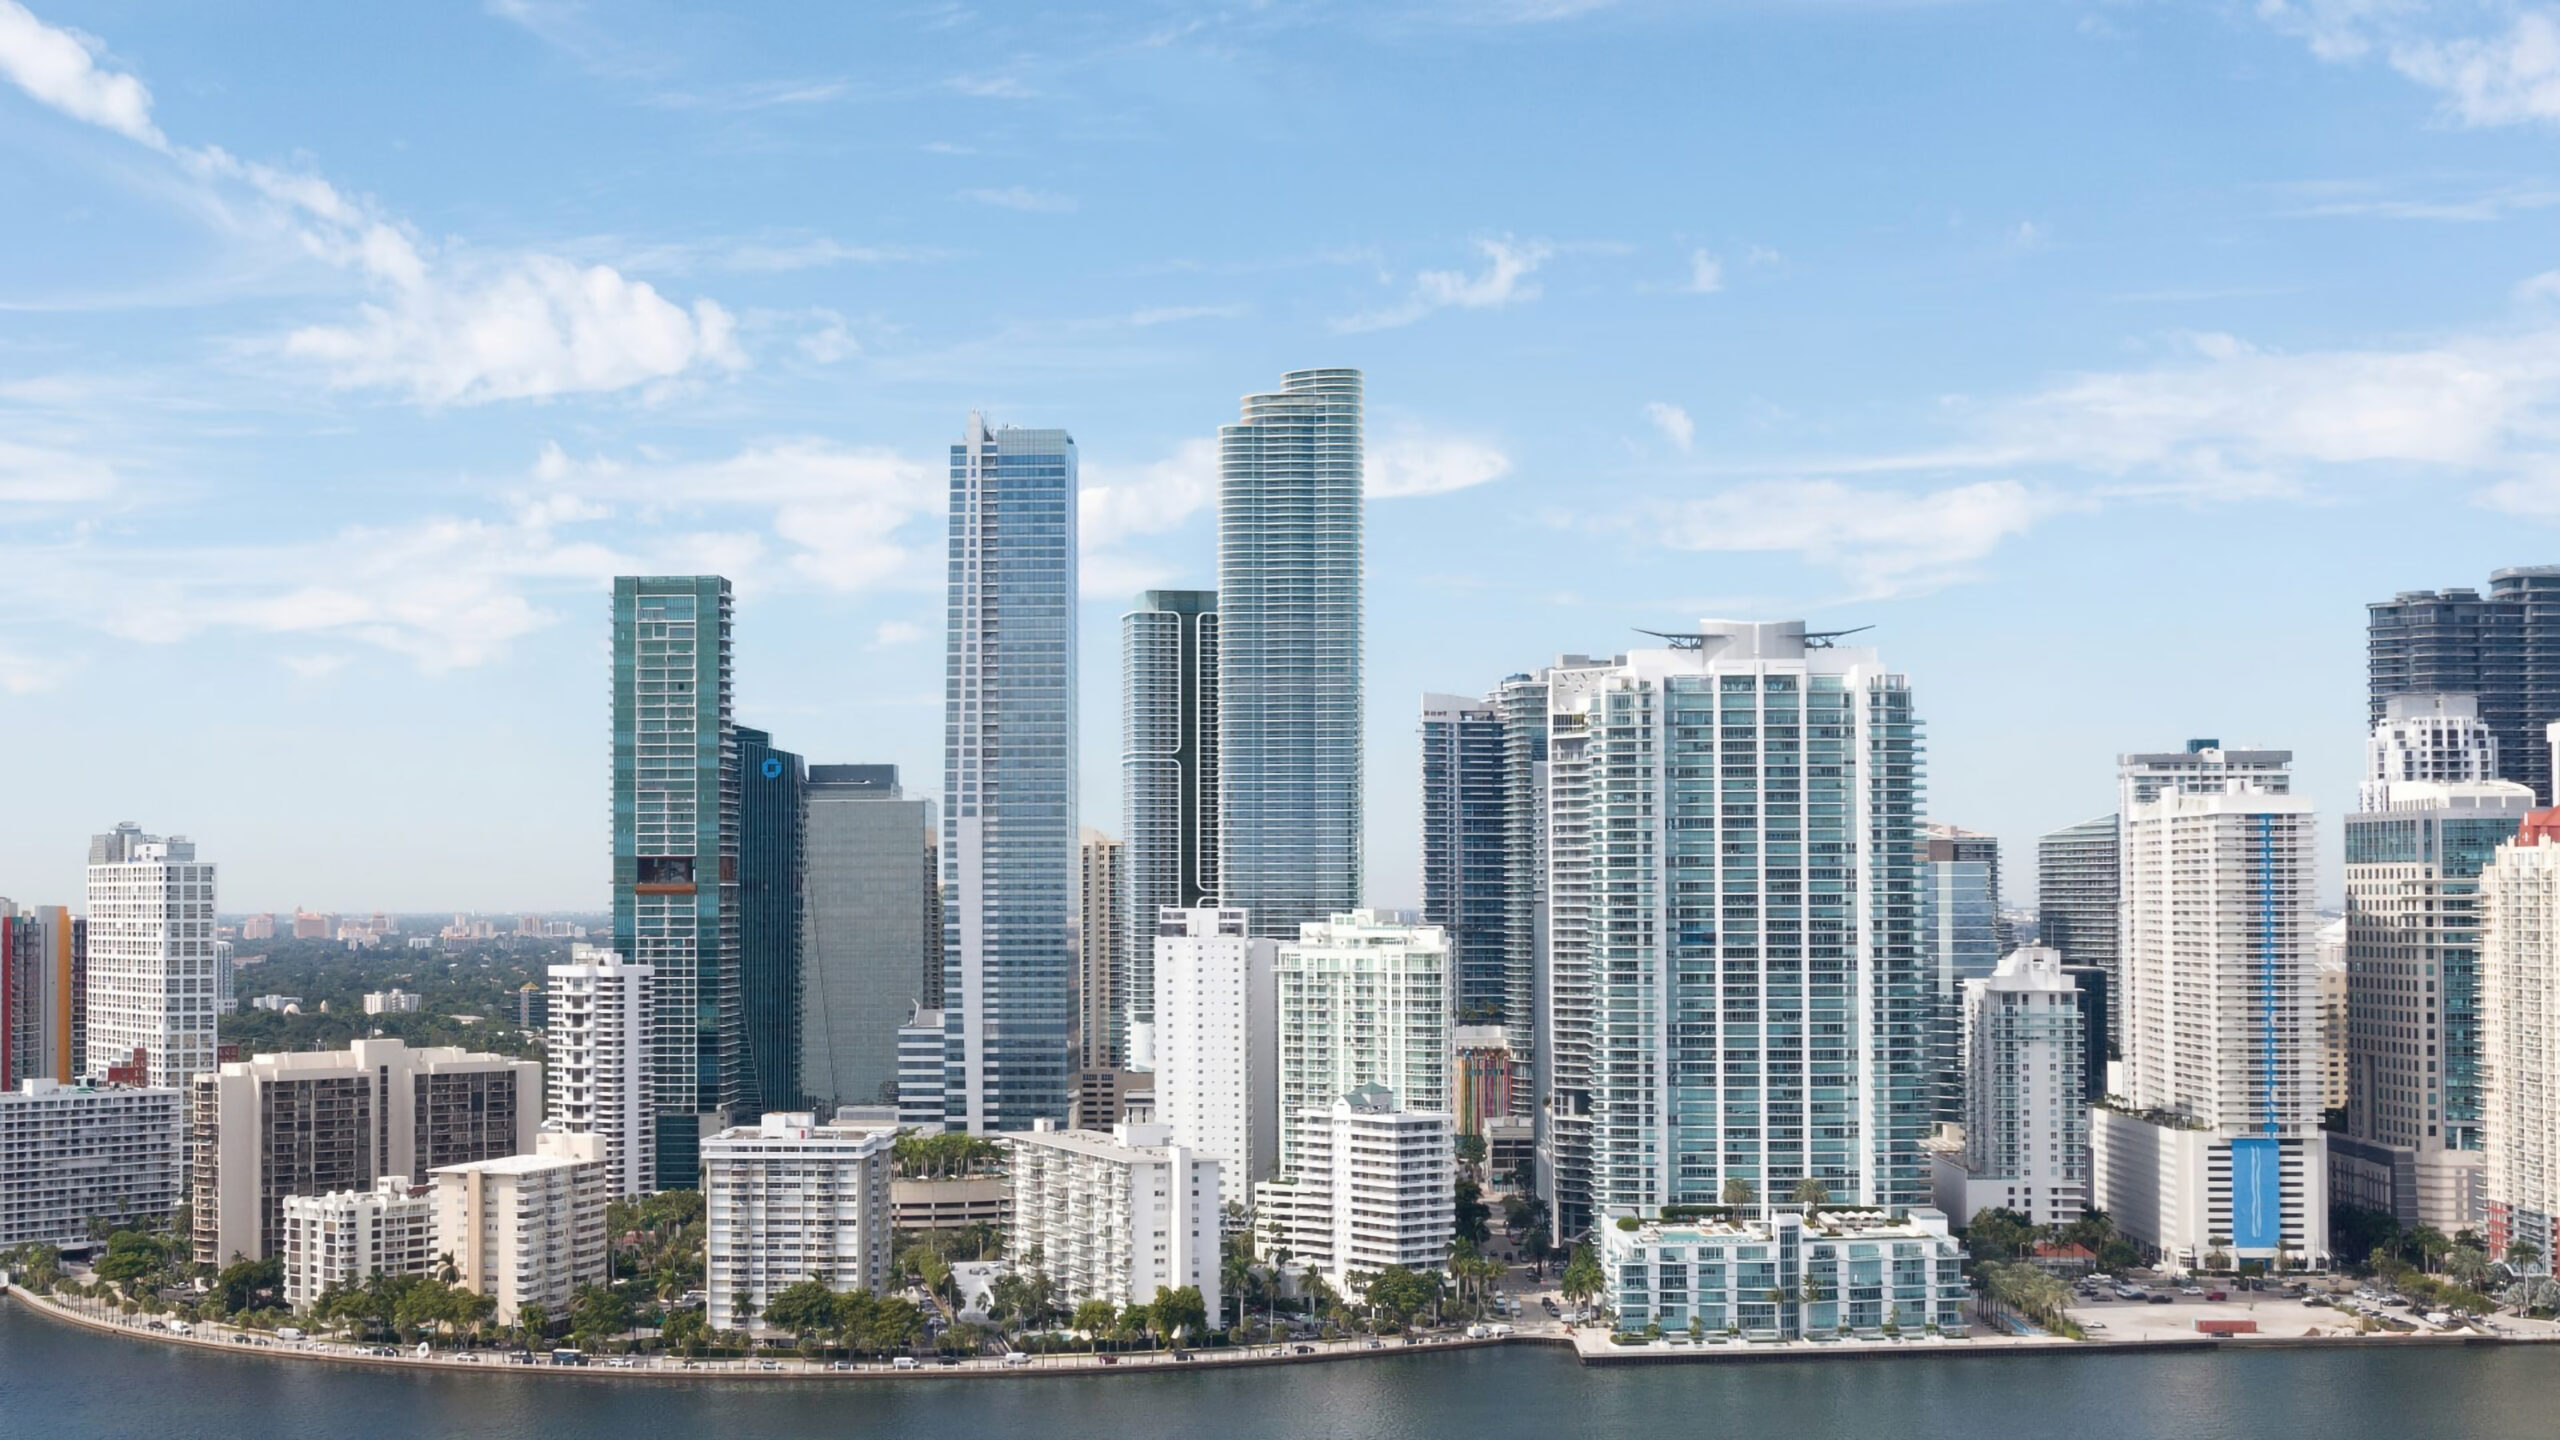 Record-Breaking $600M Construction Loan Secured by Mast Capital for Cipriani Condo Tower in Brickell